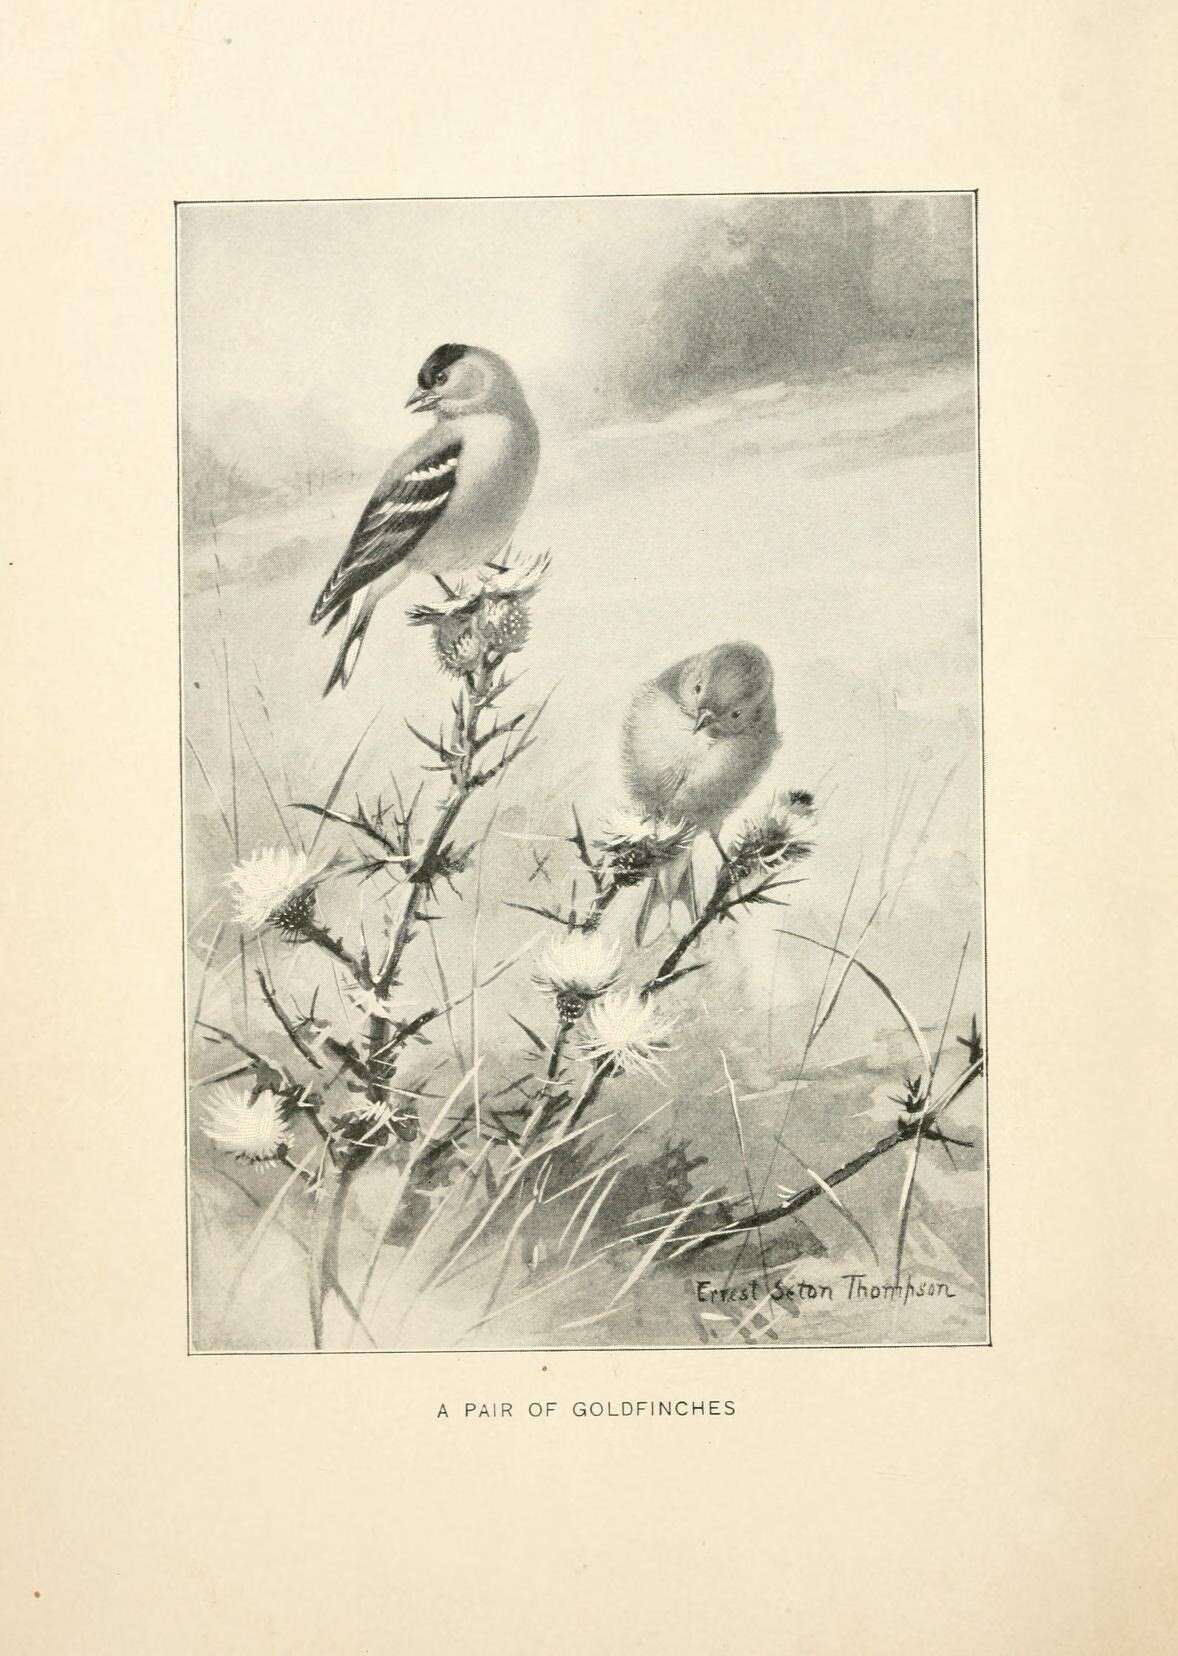 Image of American goldfinch